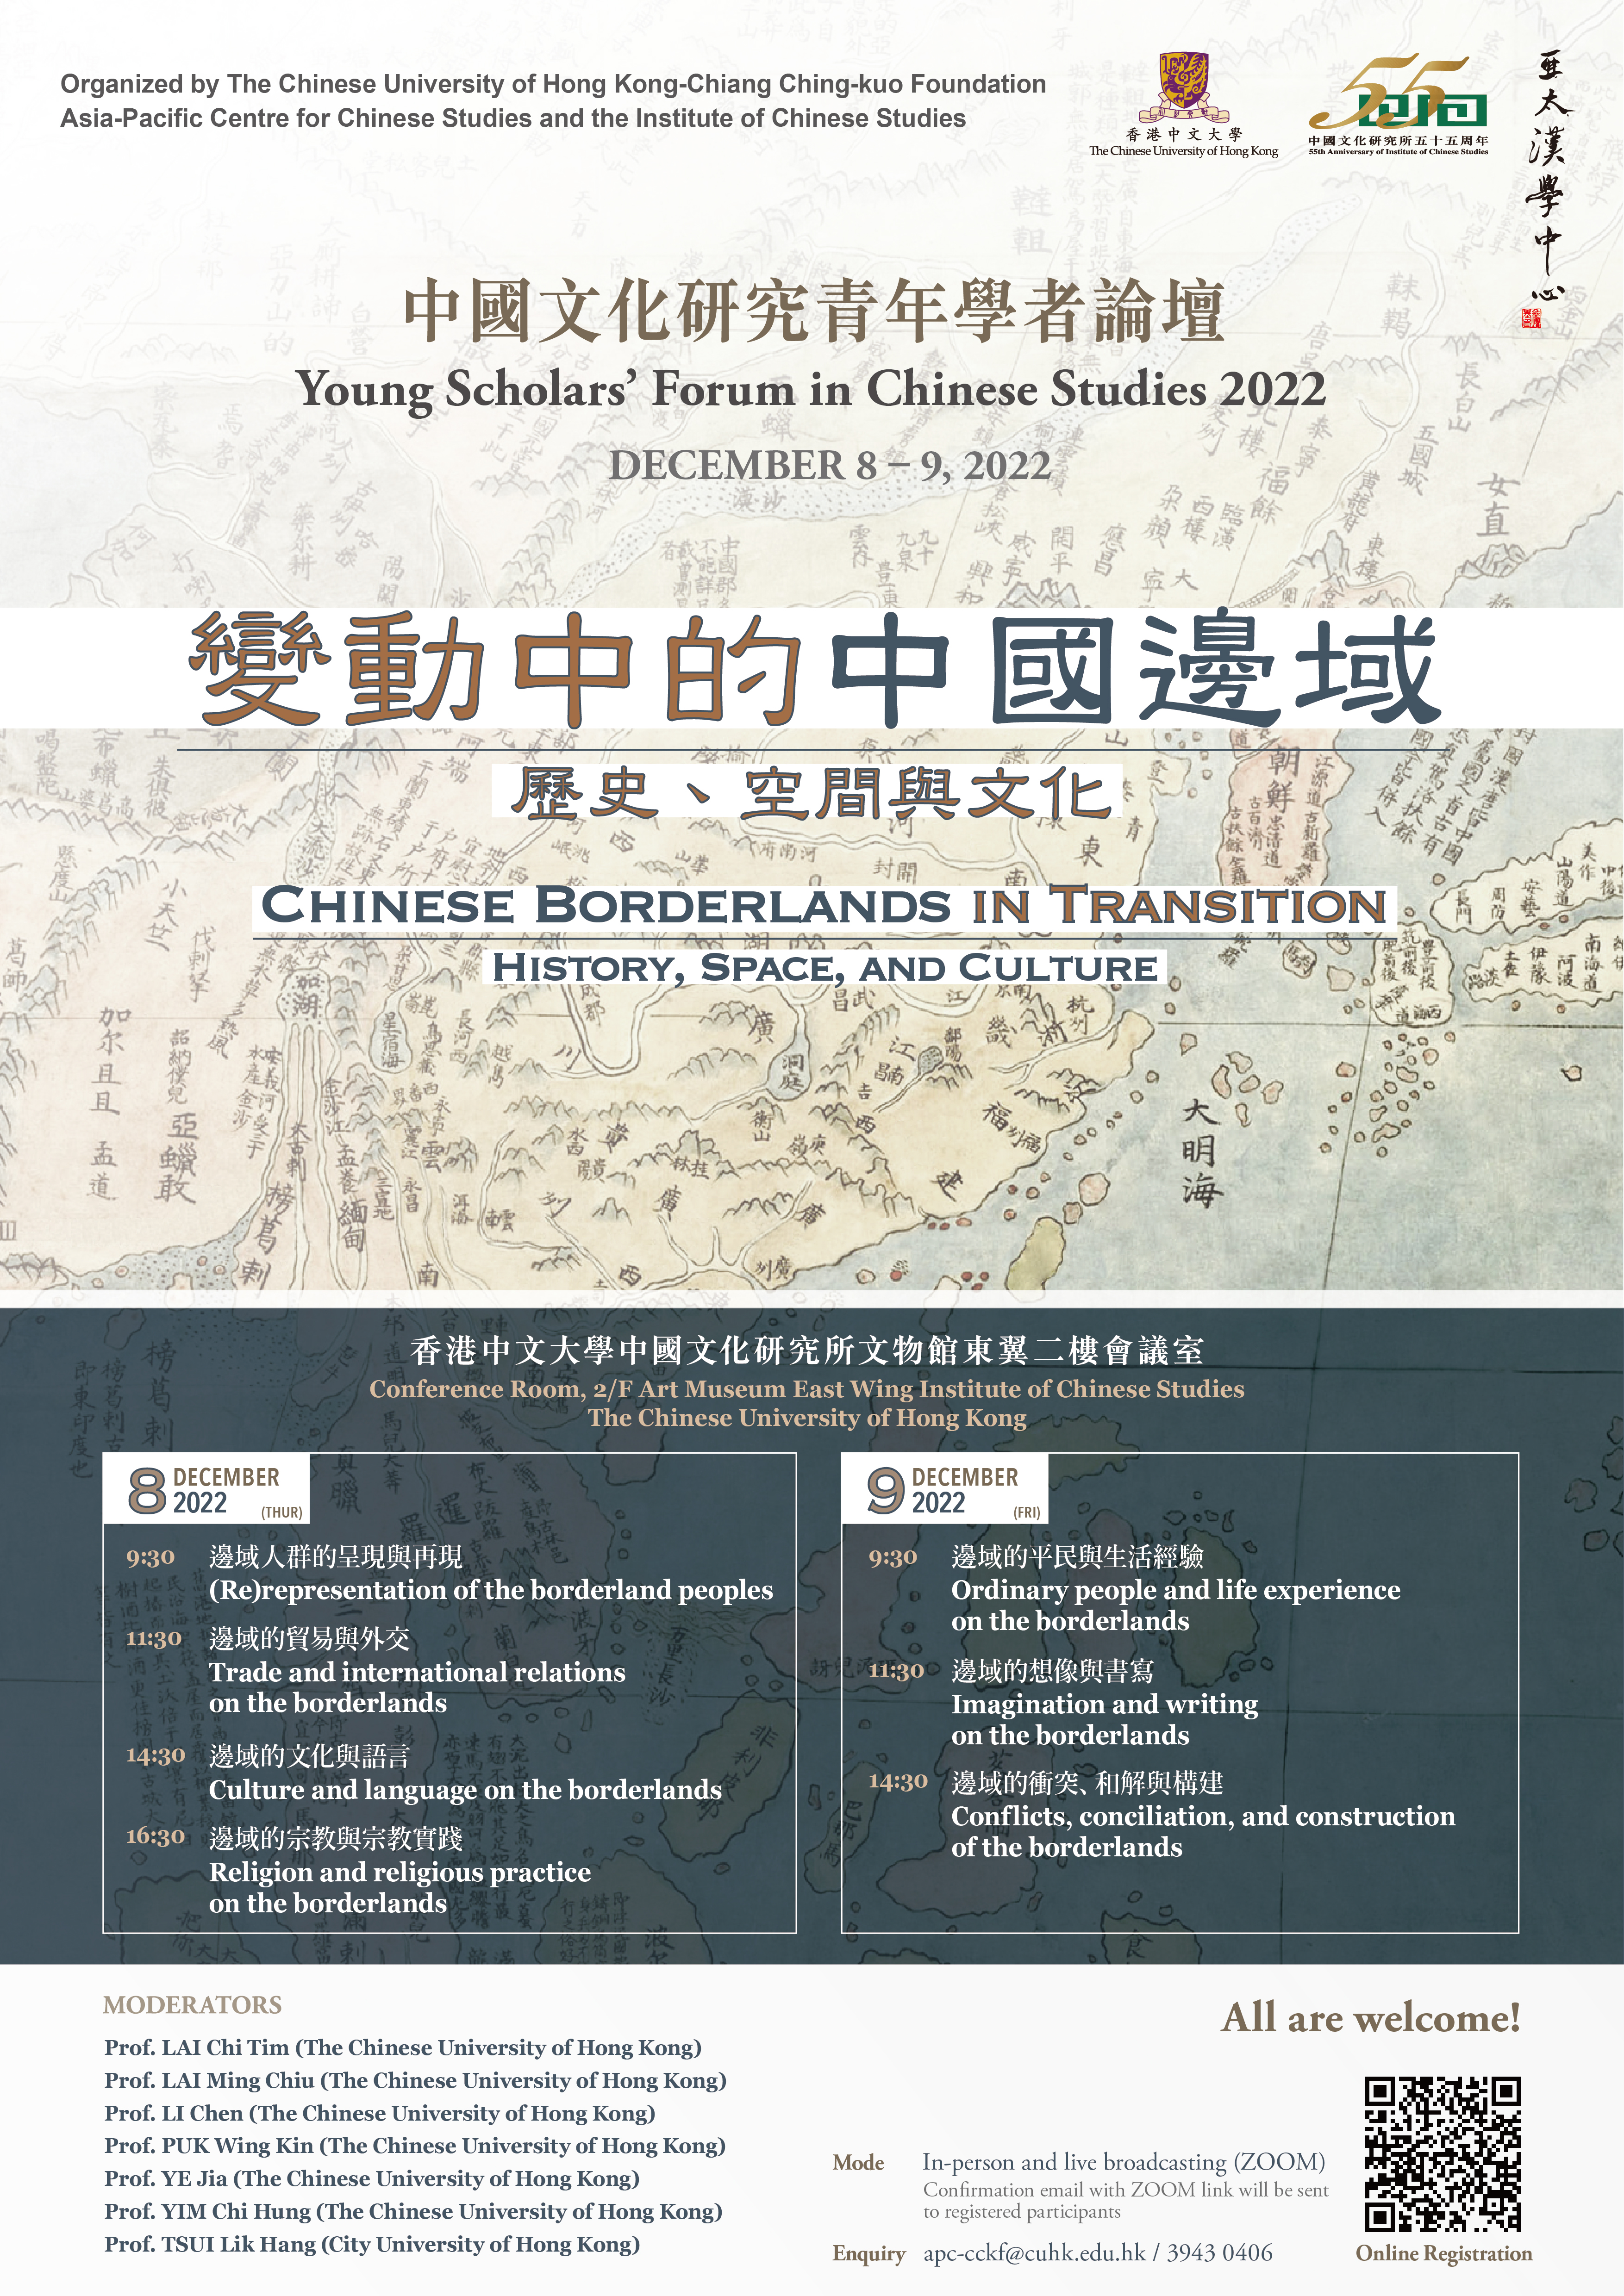 Young Scholars' Forum in Chinese Studies 2022